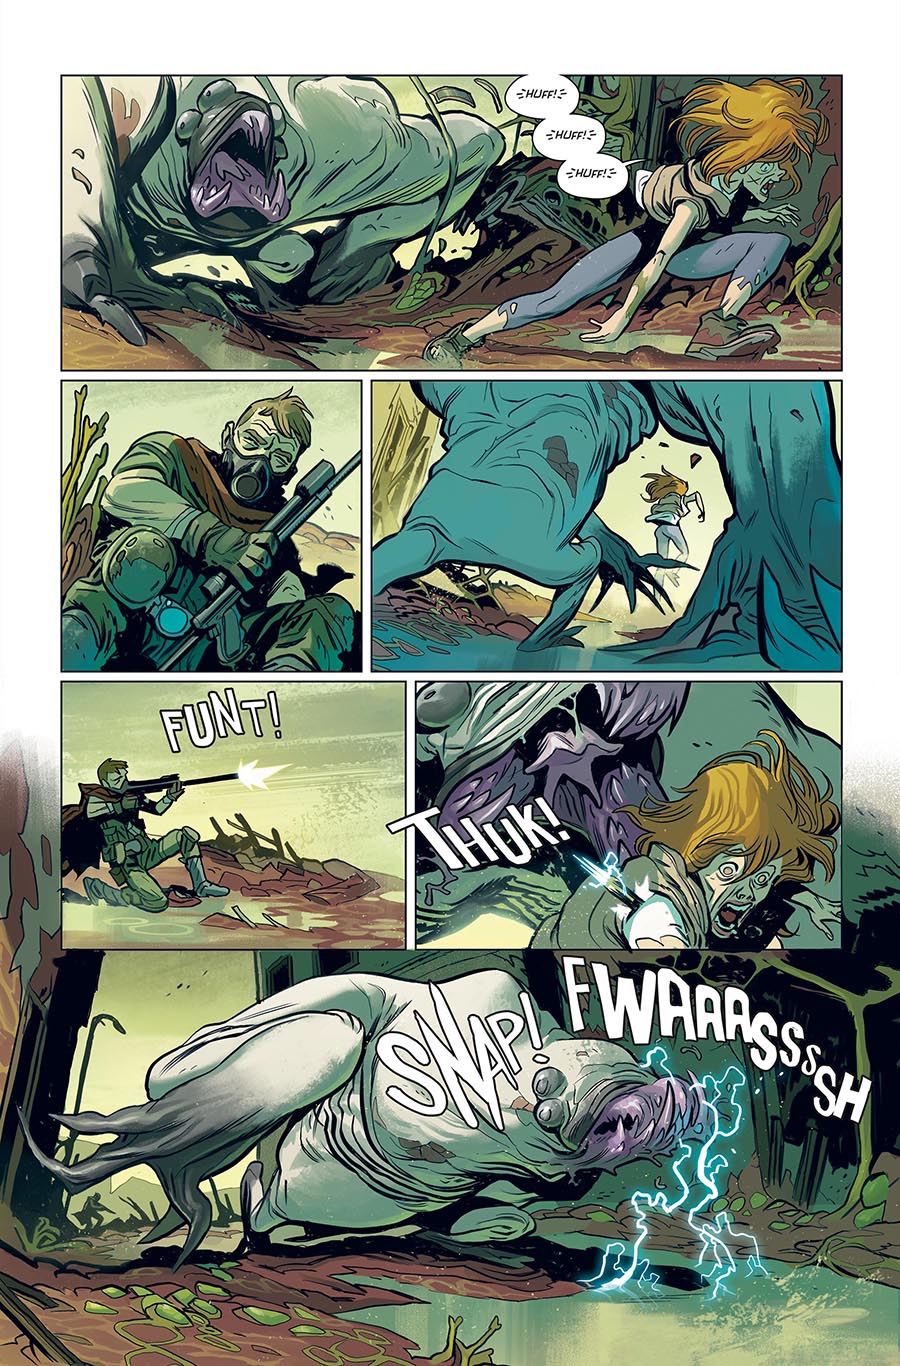 Oblivion Song Preview Page 5